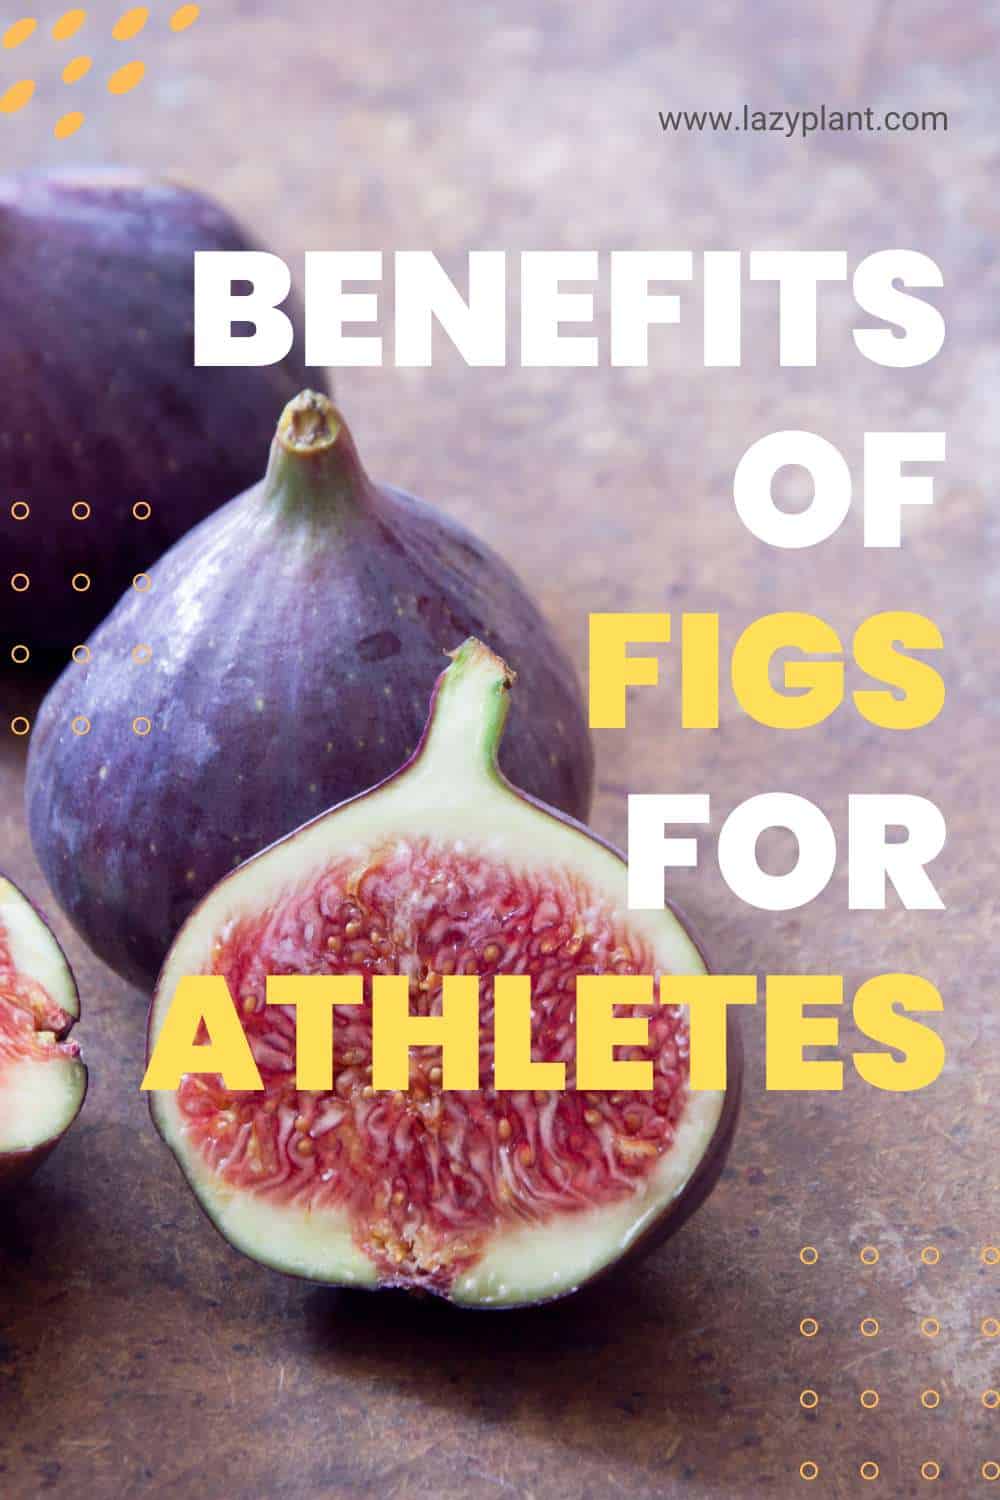 10 reasons why athletes should daily eat figs!